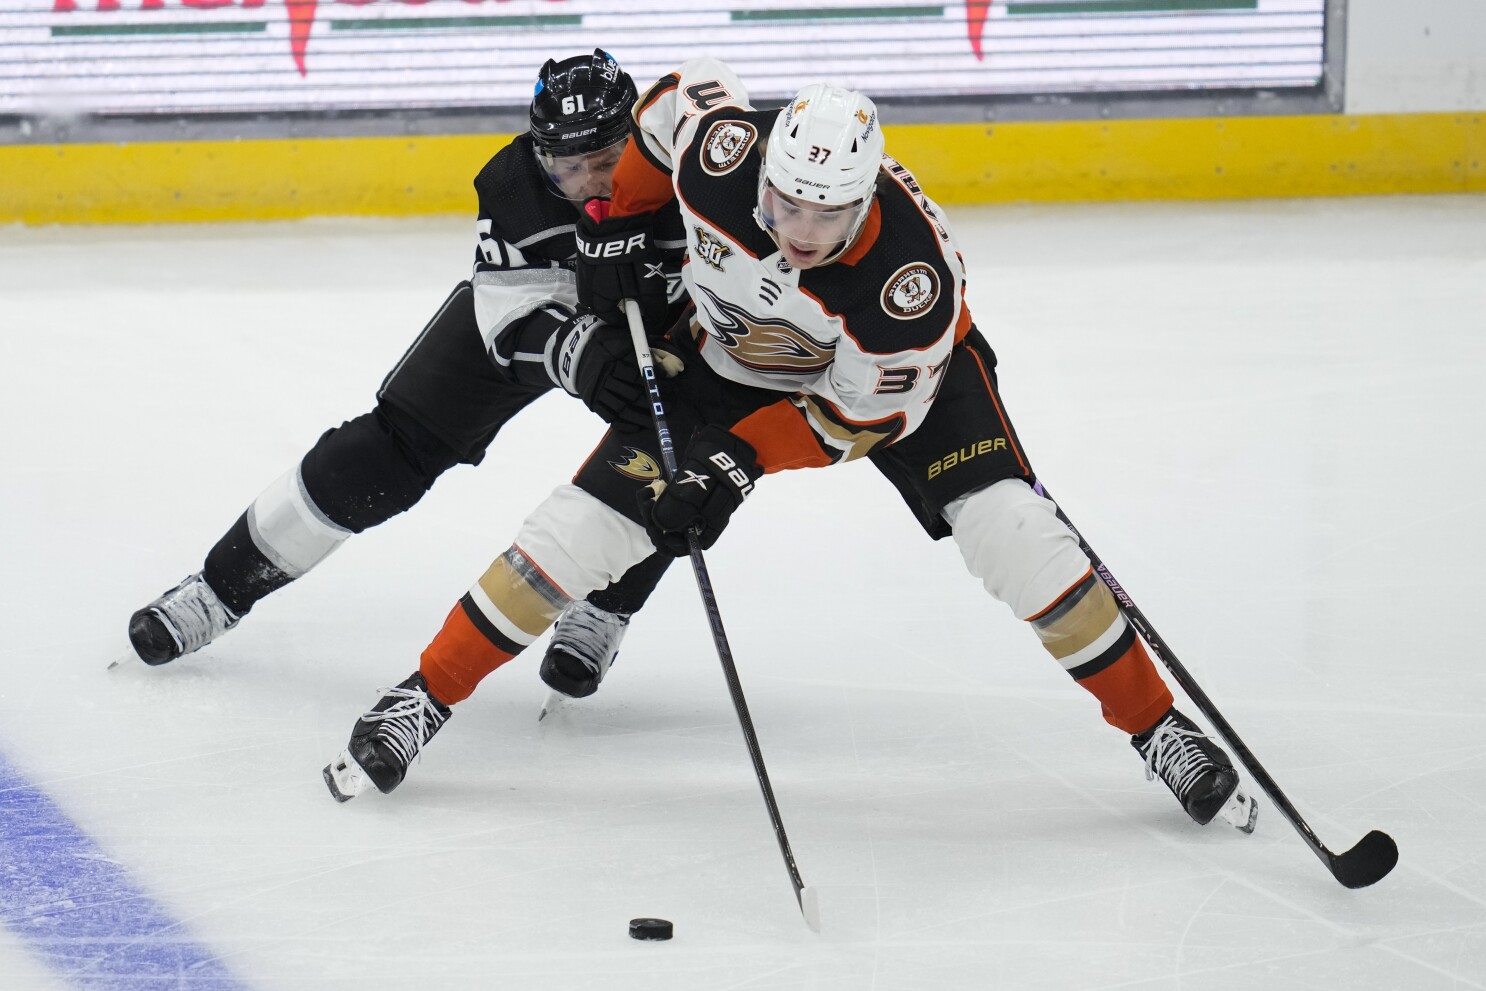 Why the Anaheim Ducks should move to their orange third jersey full time